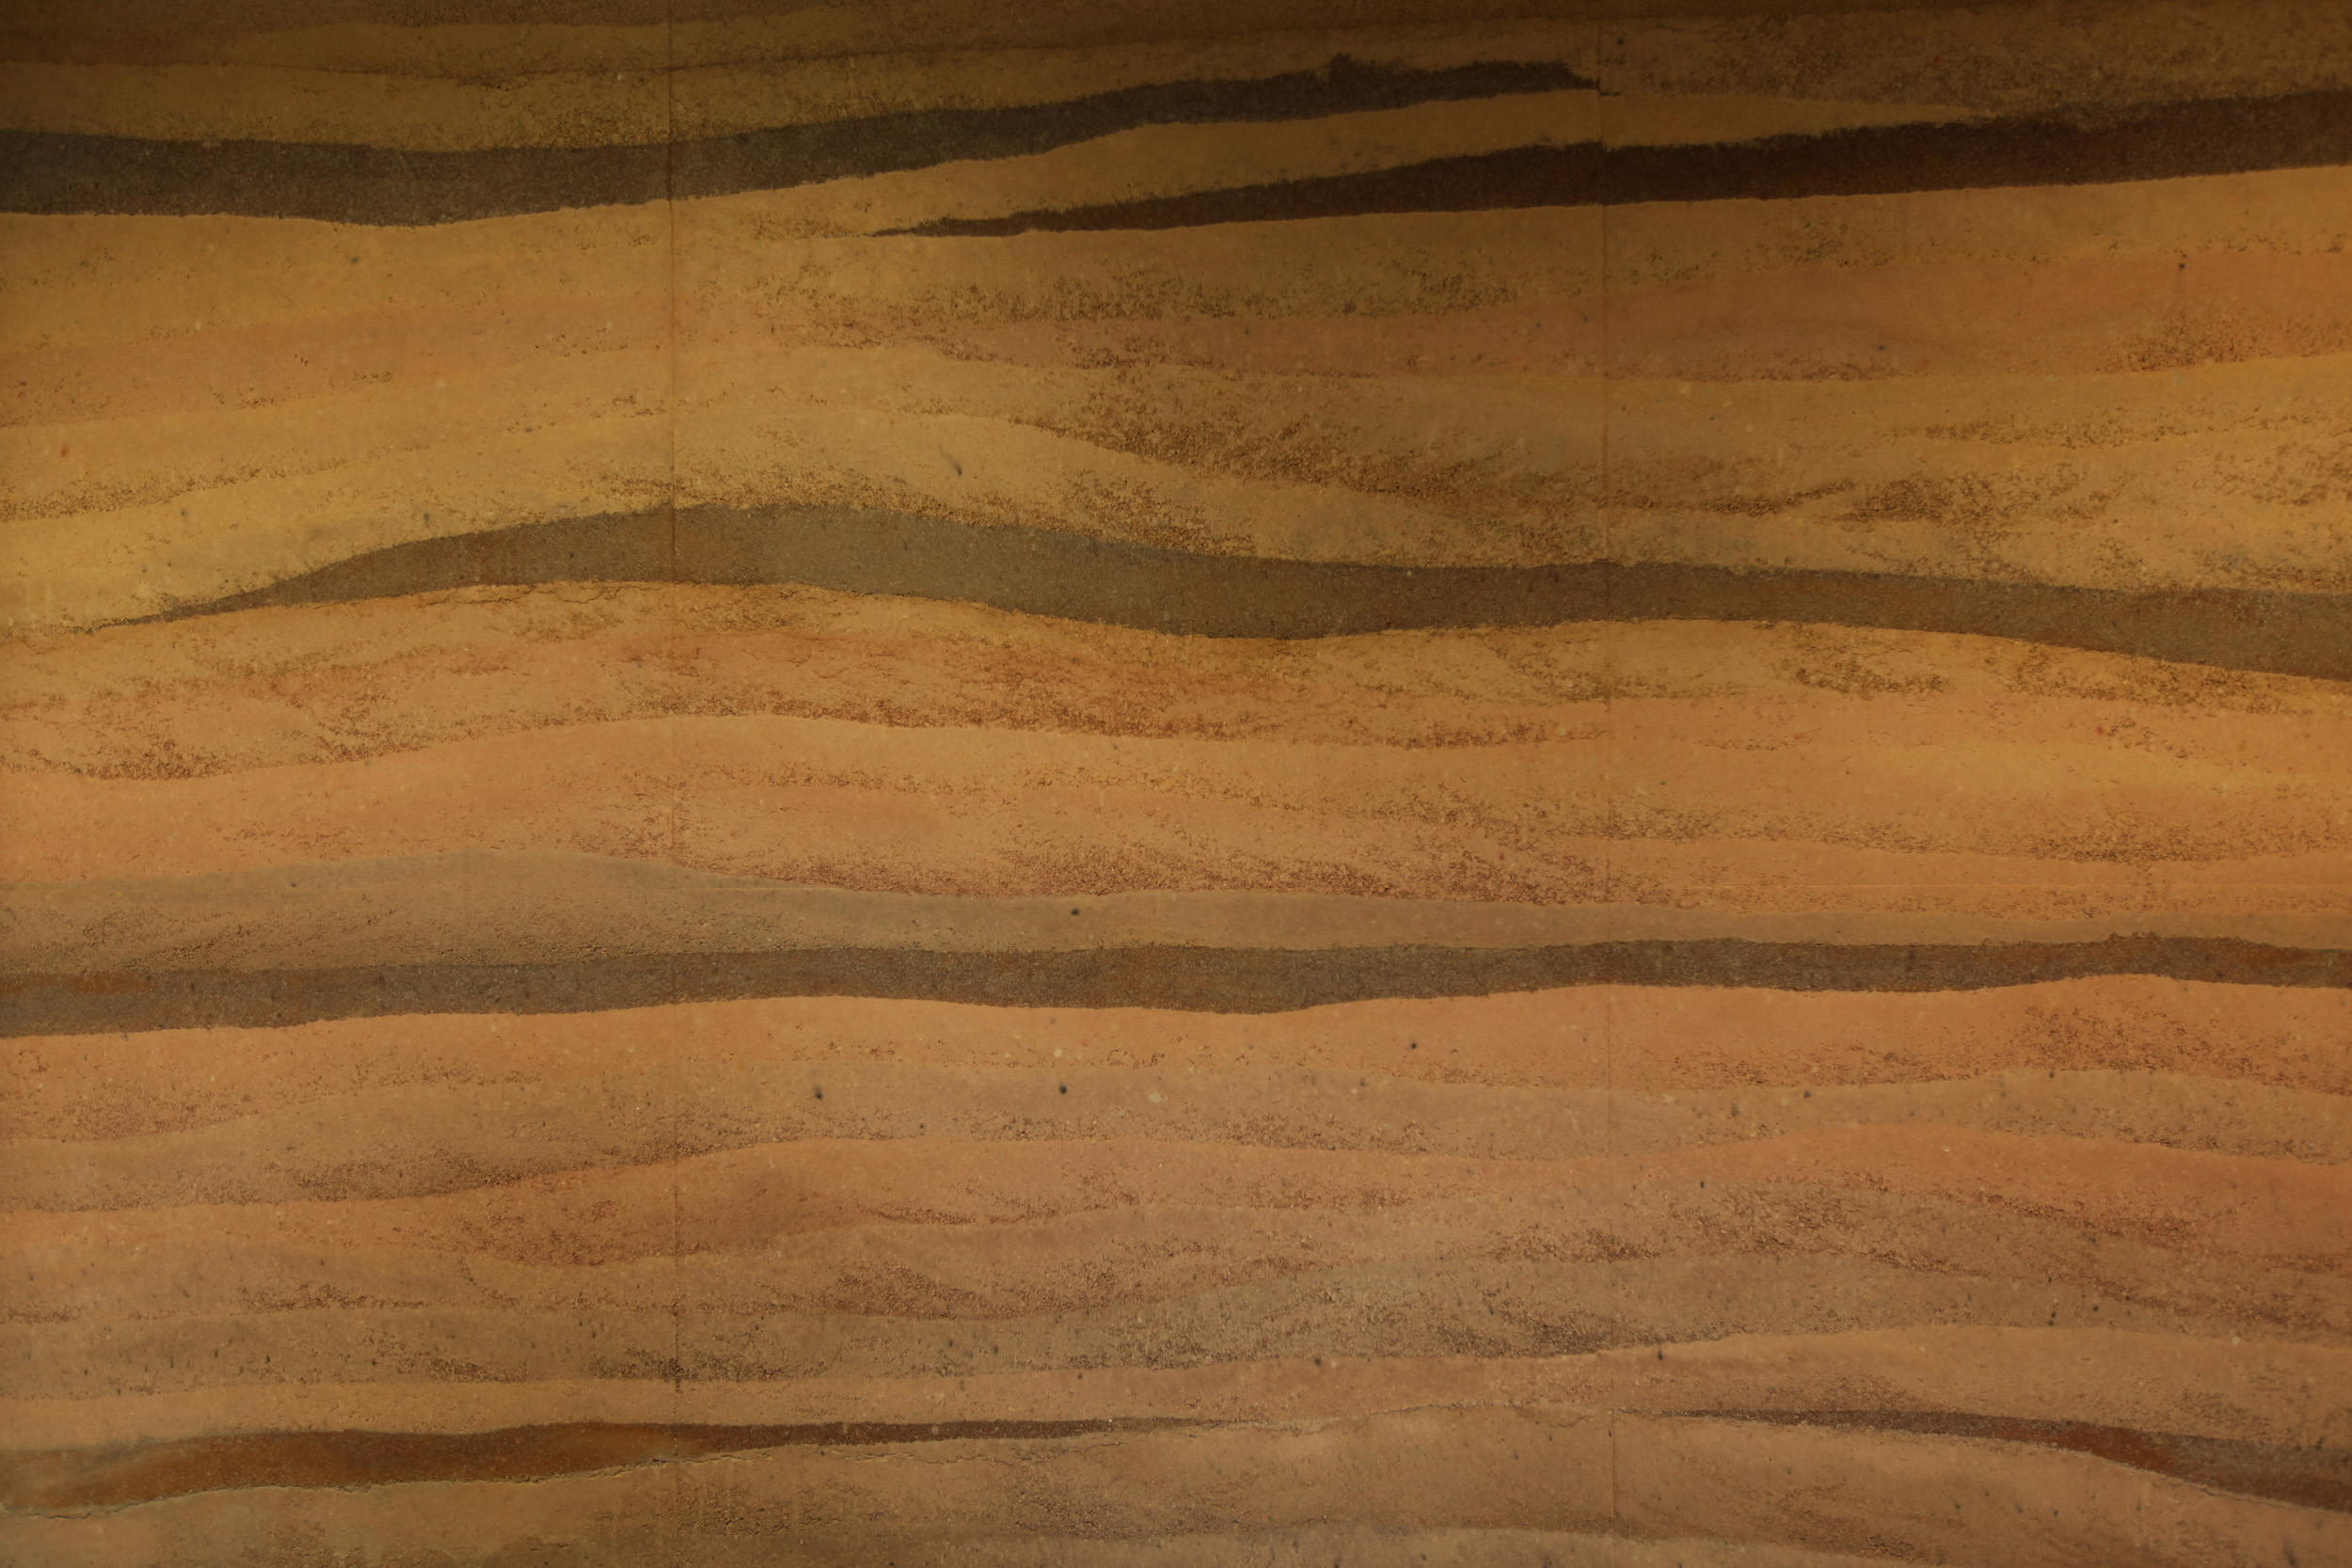 Mud Hut Rebirth, a close up view of the ferrimagnetic rammed earth wall